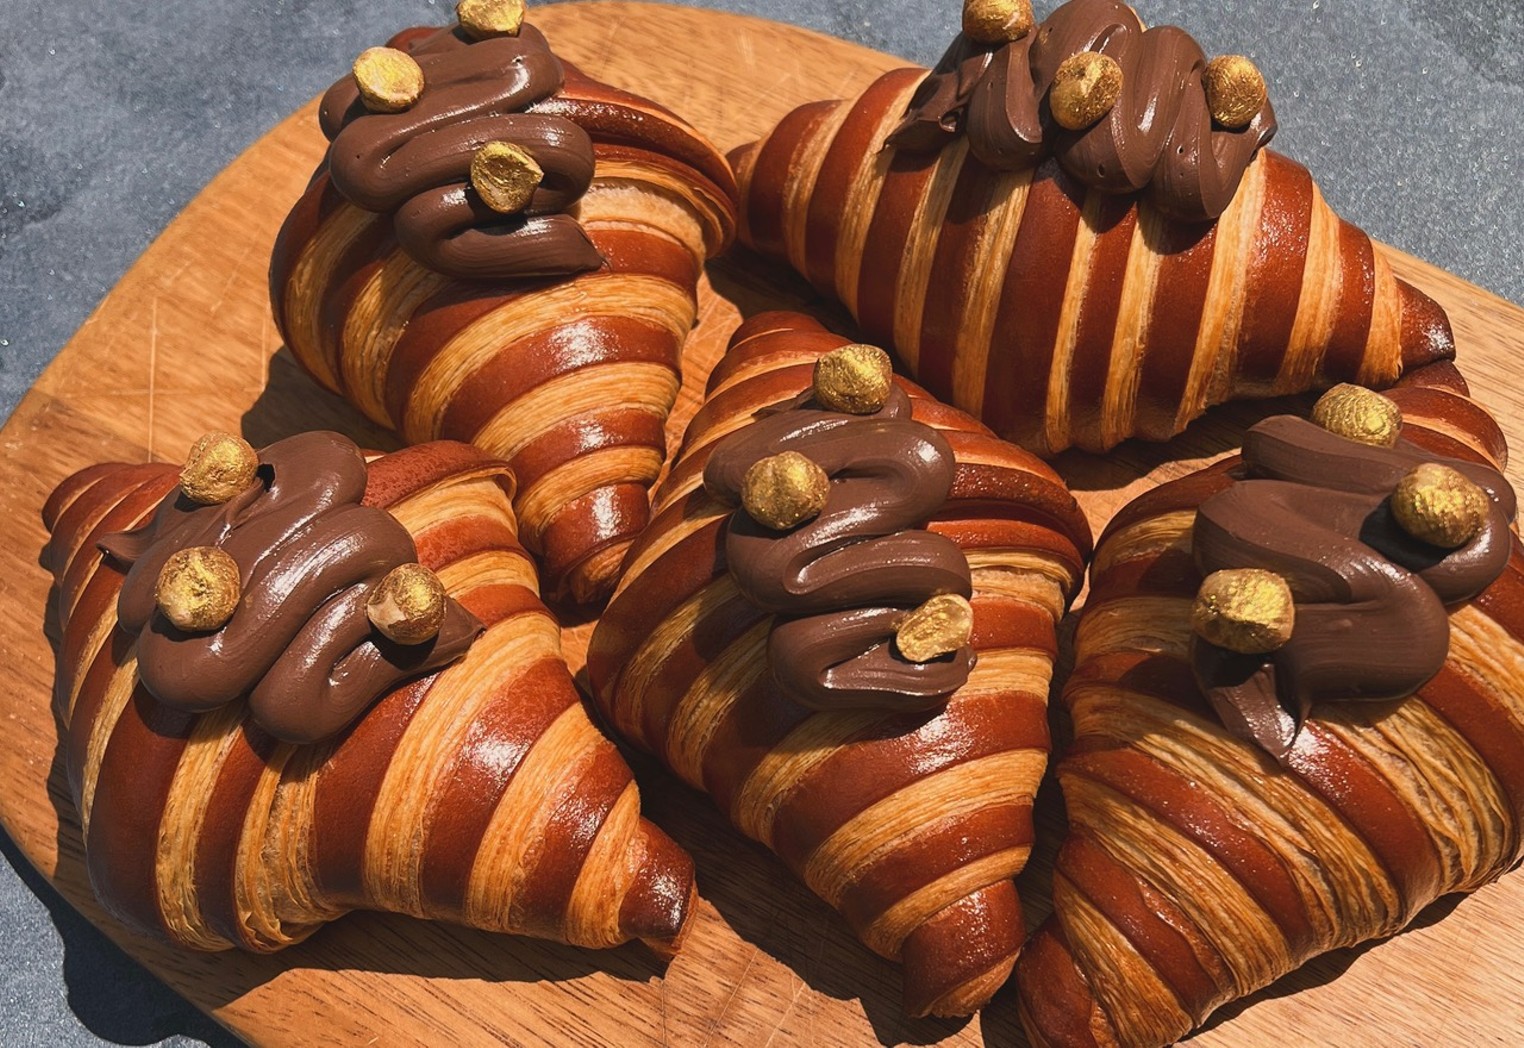 Miami French Bakery Casa Bake Goes Viral on Instagram for Croissants – Miami New Times